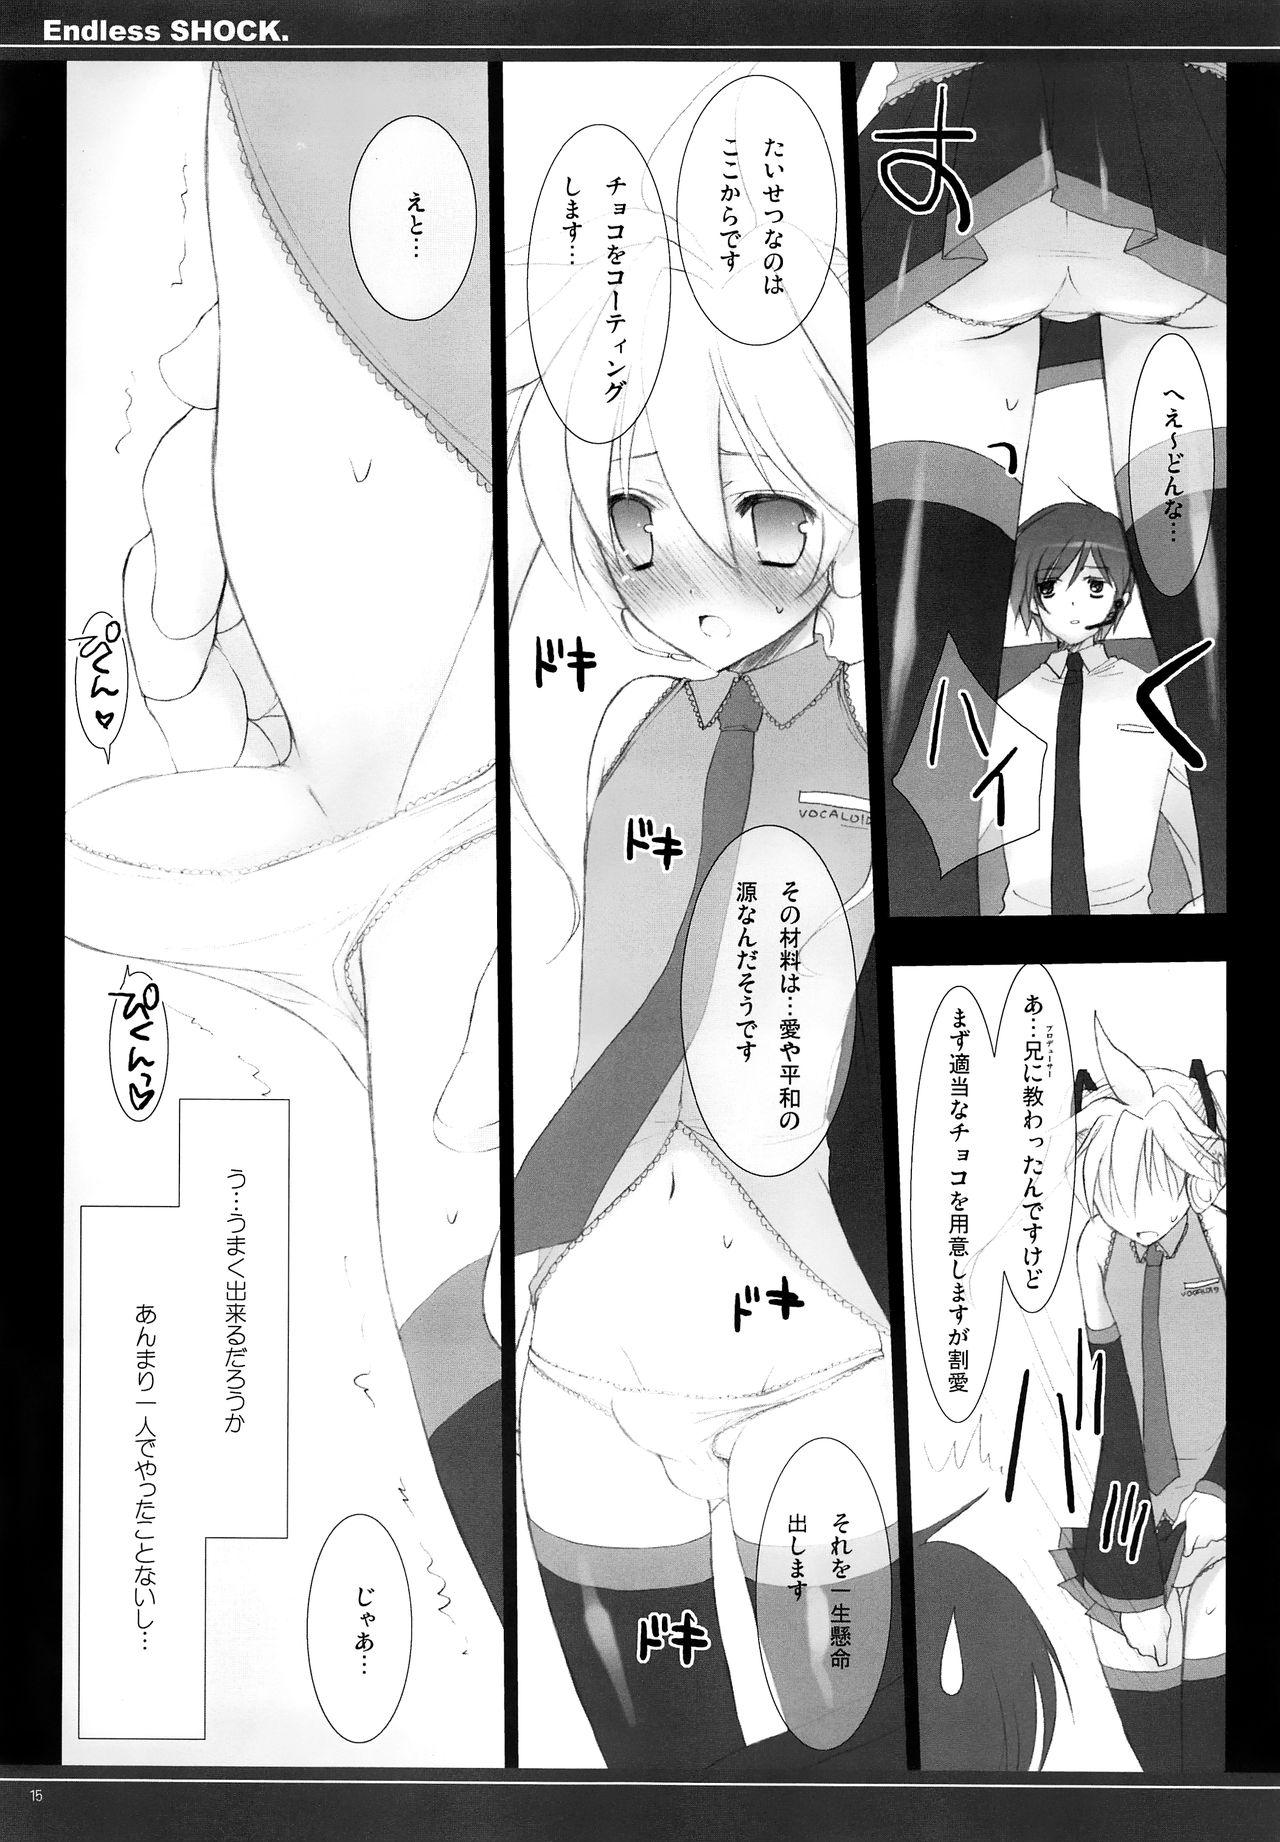 Lover ENDLESS SHOCK. - Vocaloid Petite Teenager - Page 12